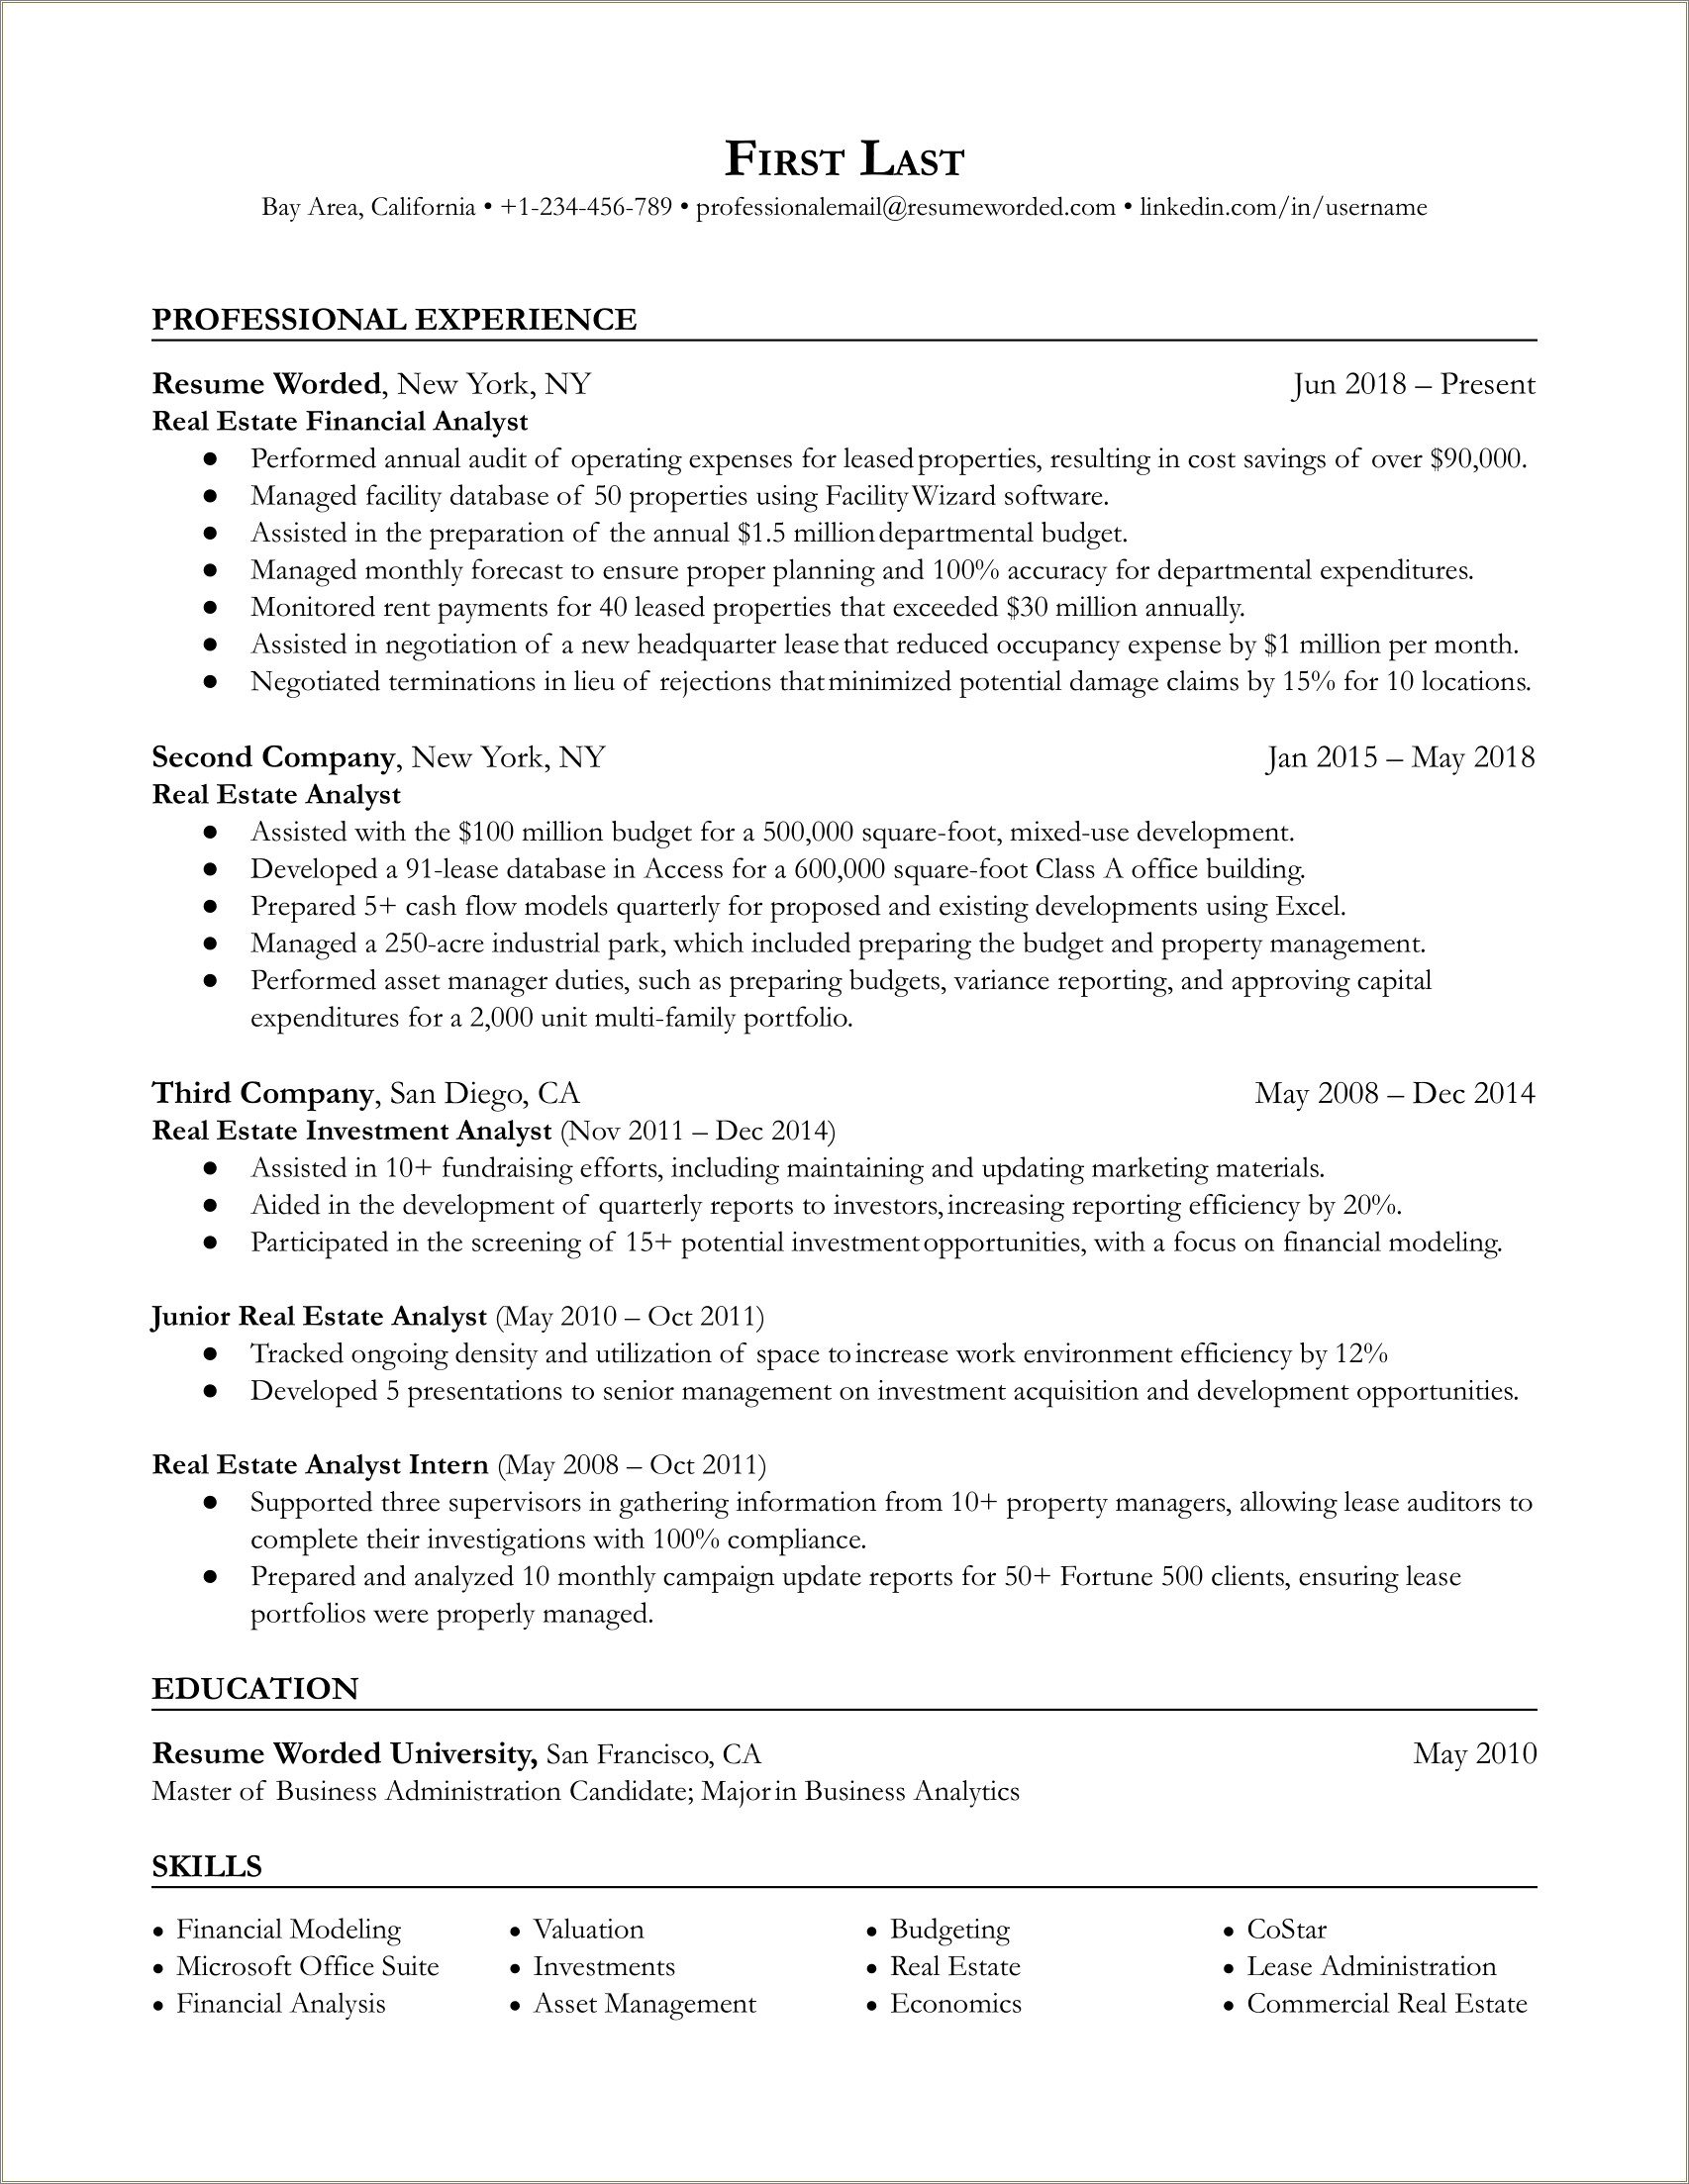 Wealth Management Advisor To Financial Analyst Resume